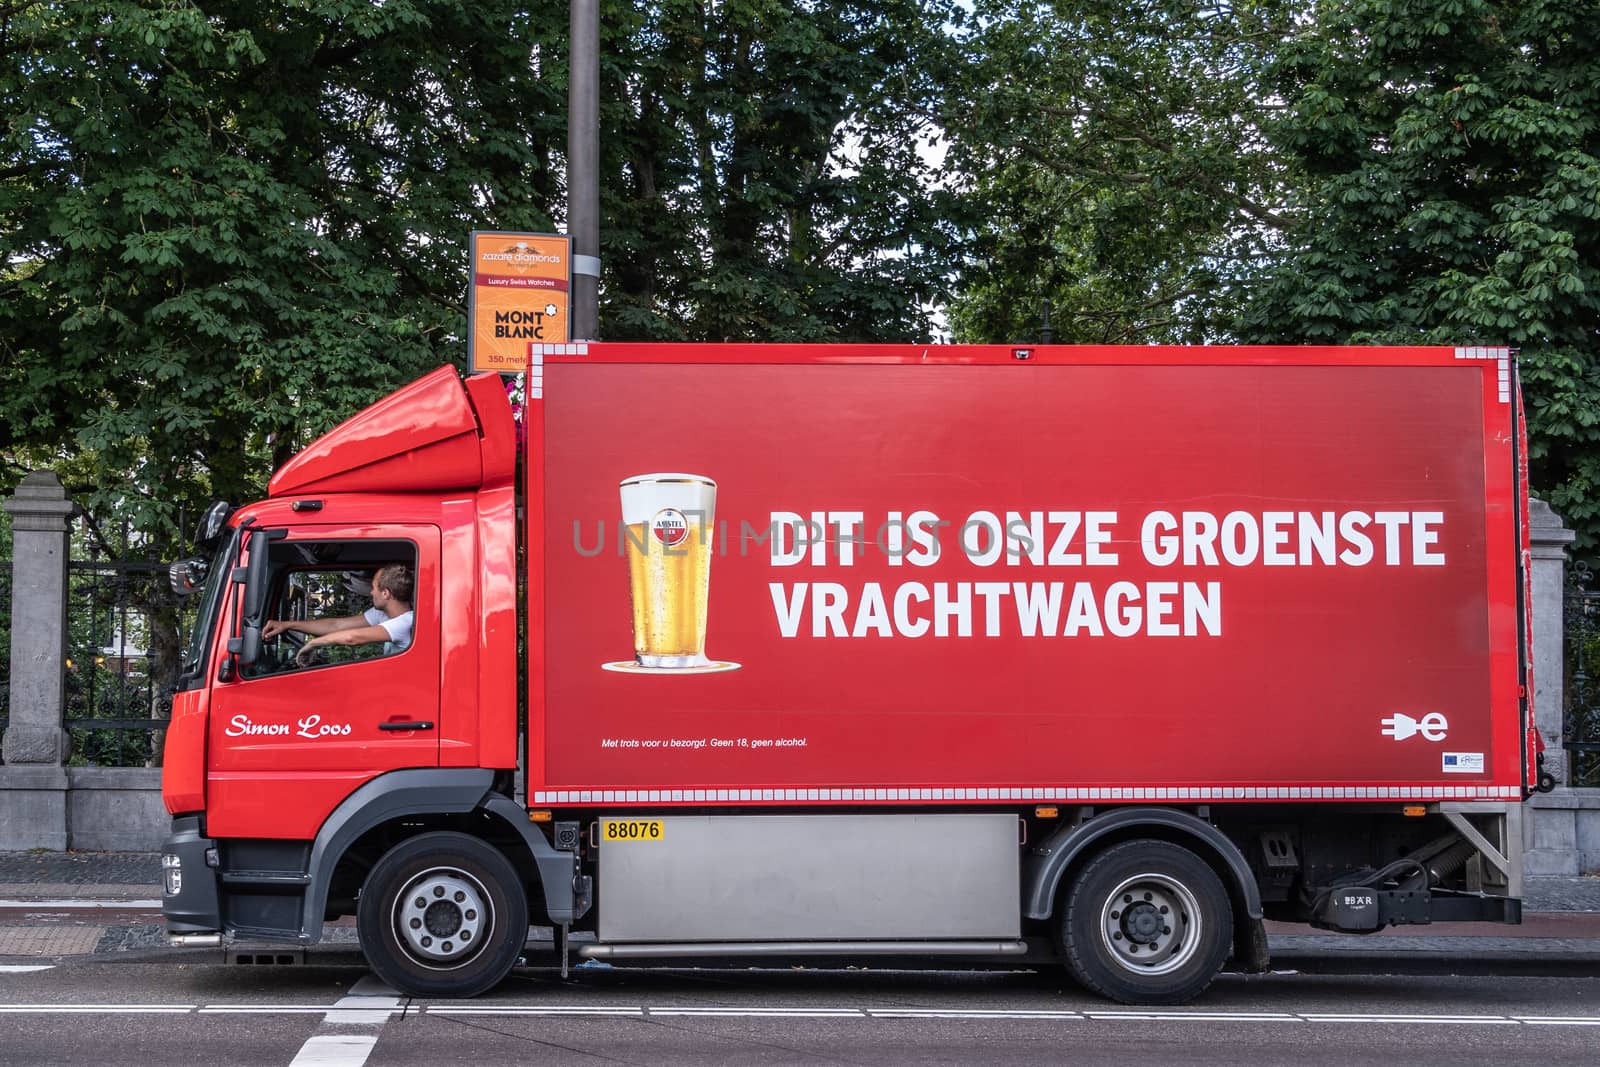 Amsterdam, the Netherlands - July 1, 2019: Red Amstel beer delivery truck although it claims to be the greenest truck. Driver active. Image of full Amstel bier glass. Green foliage.